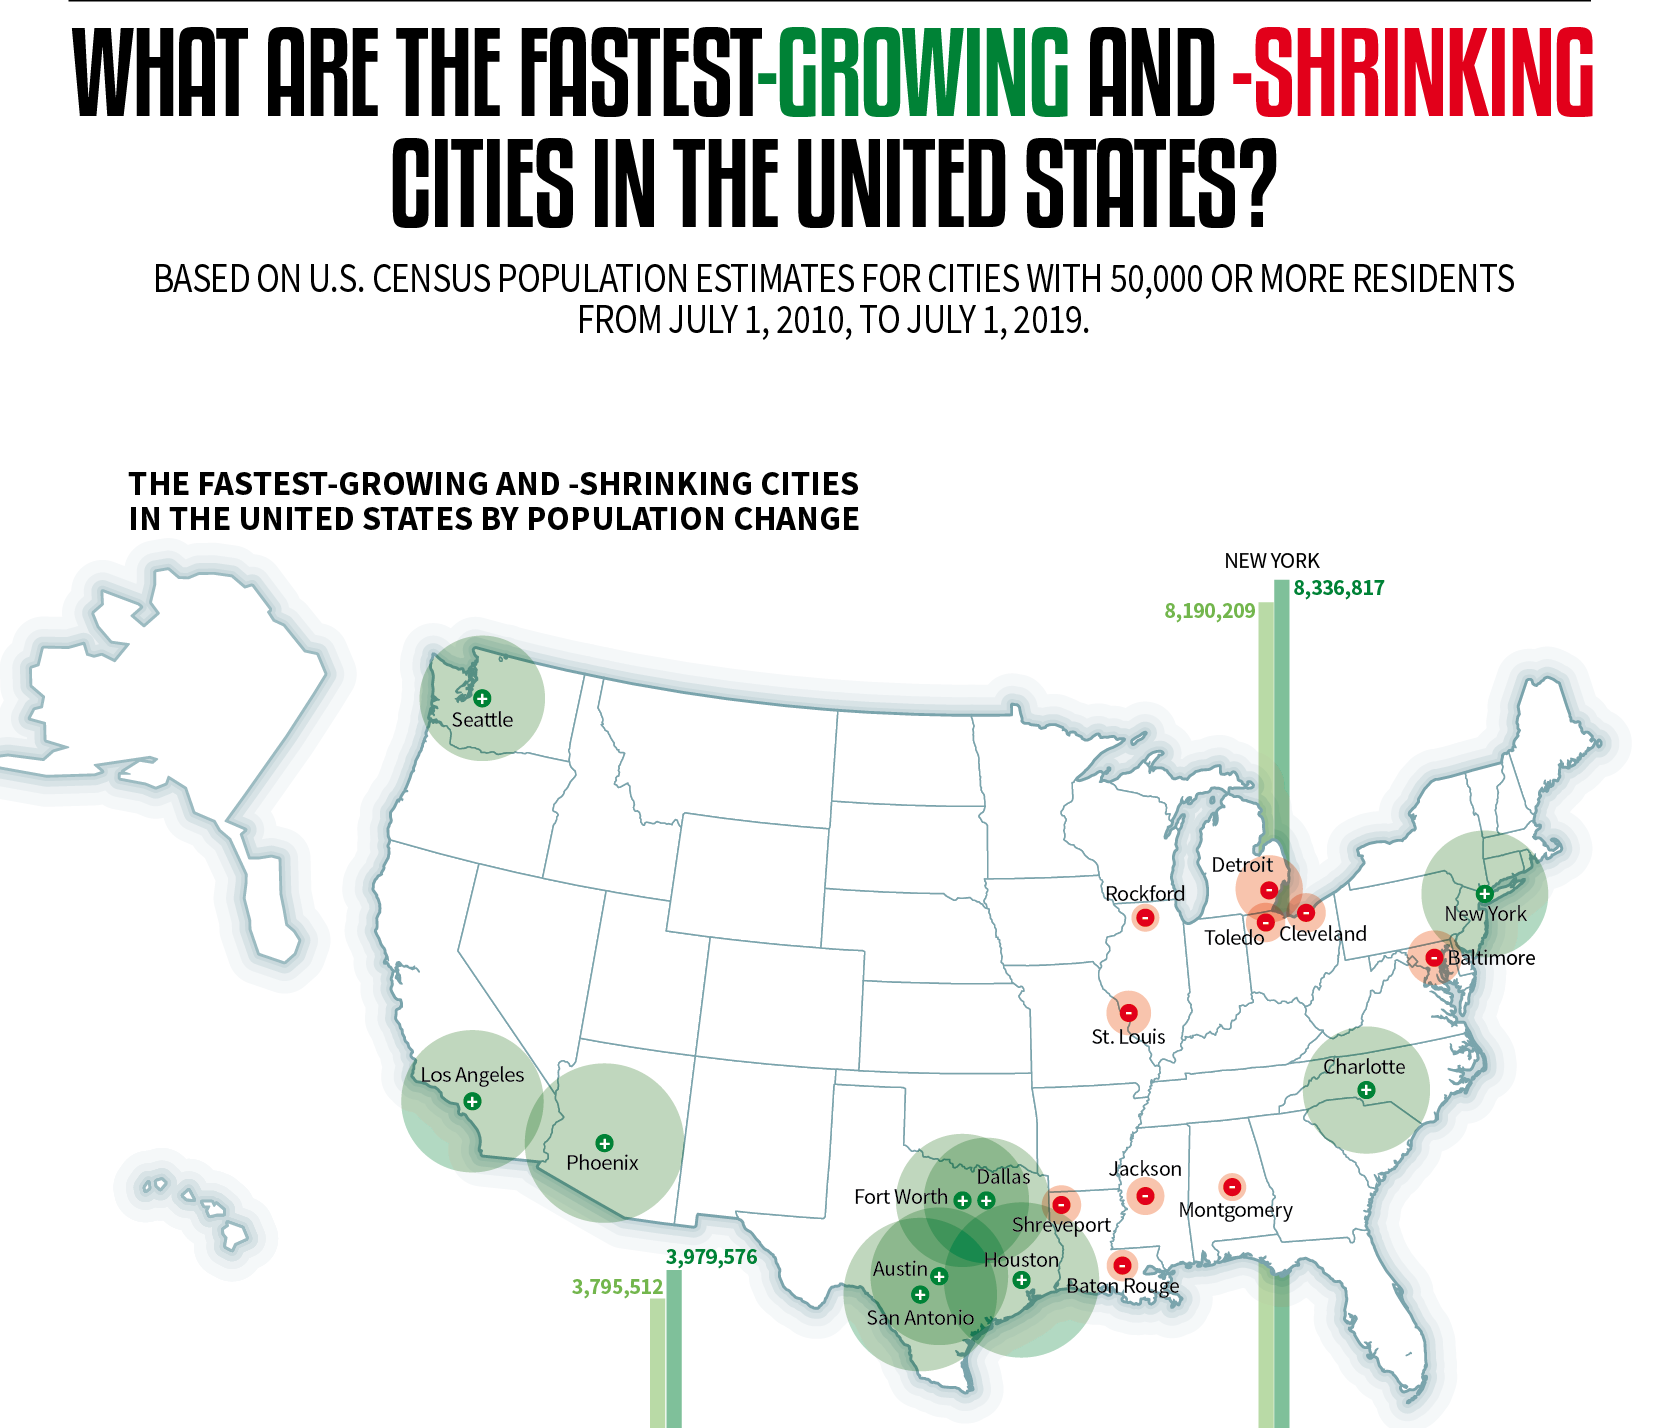 What Are the Fastest Growing and Shrinking Cities in the United States